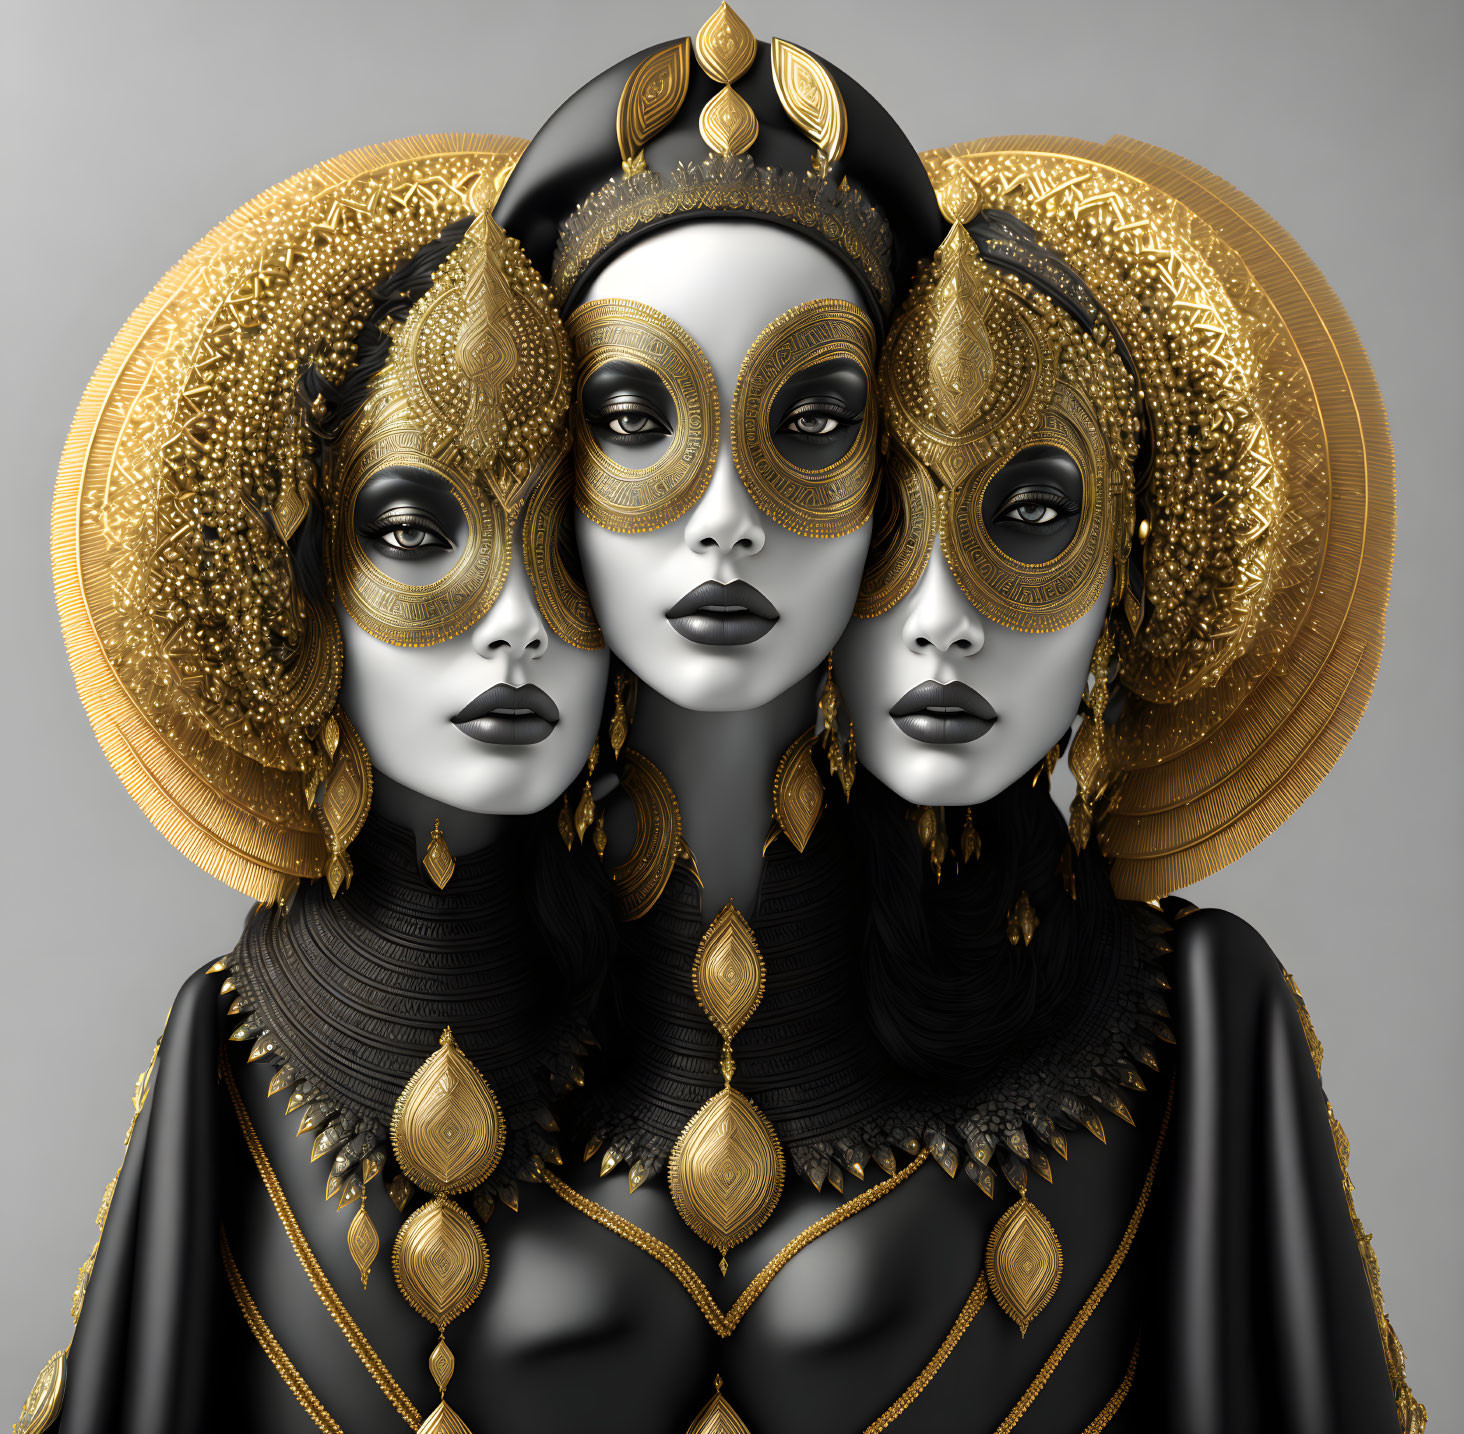 Ornate gold and black masquerade masks on three figures in elaborate attire